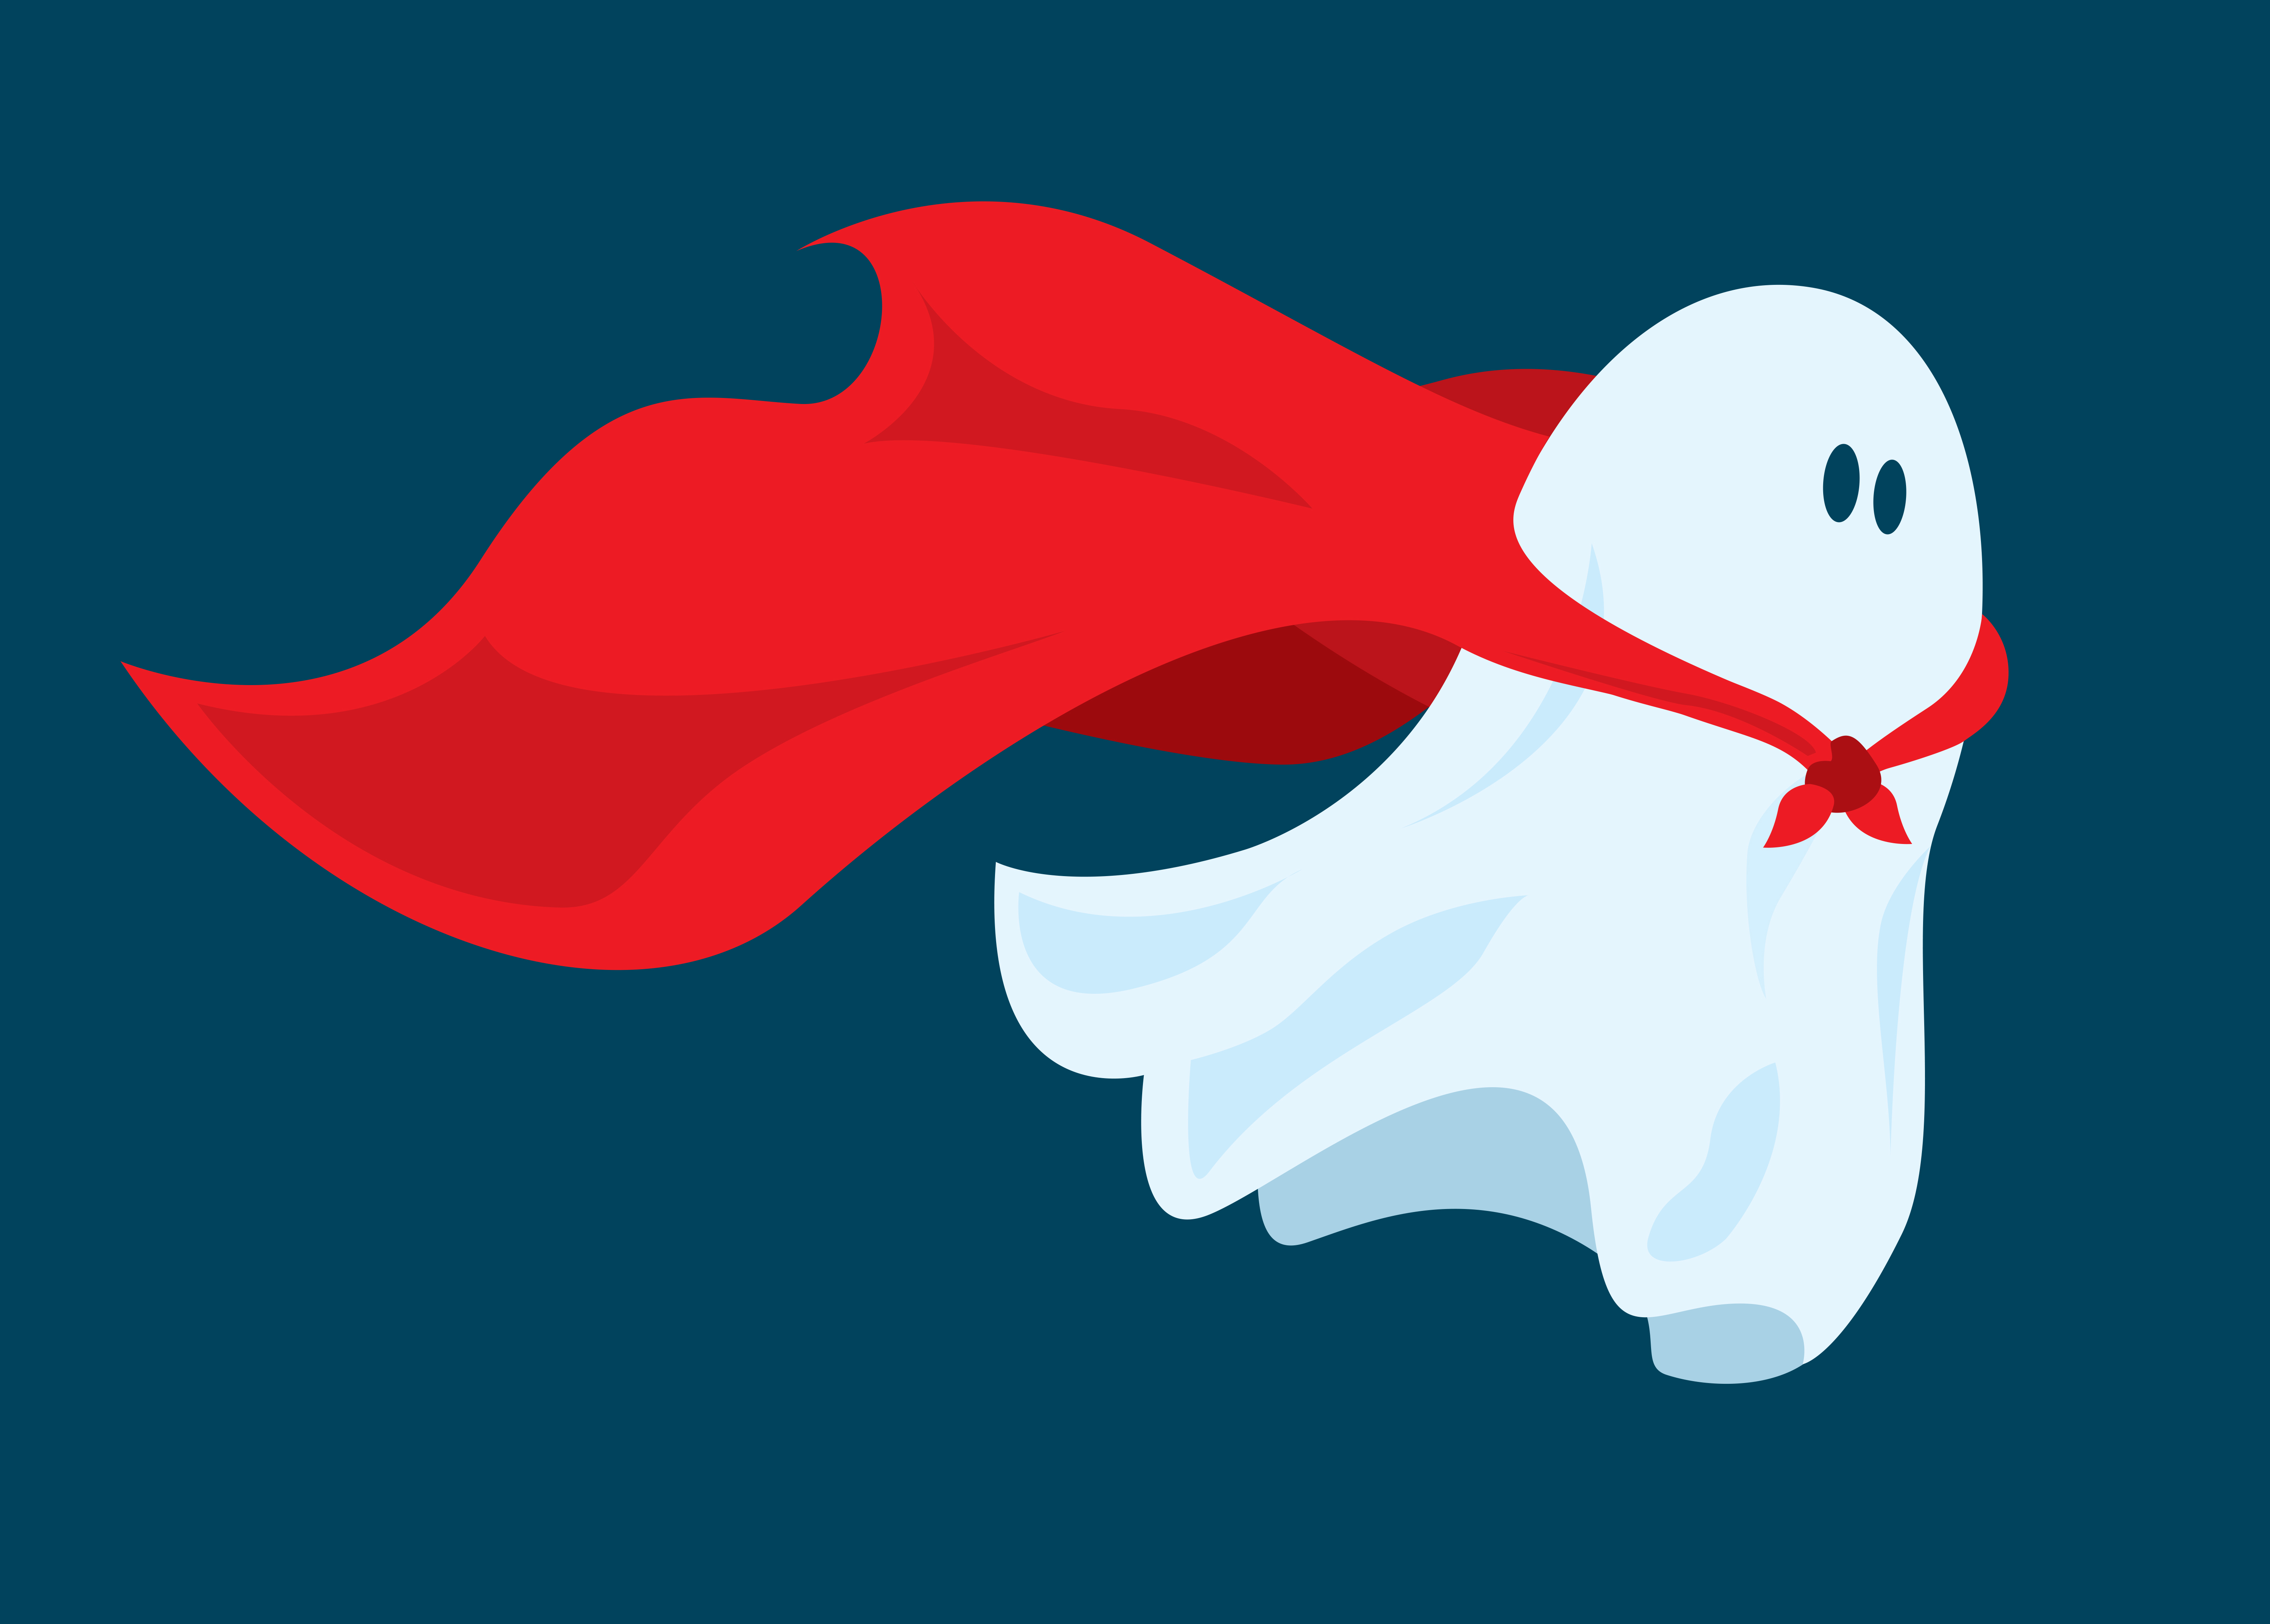 Ghost flying in red cape